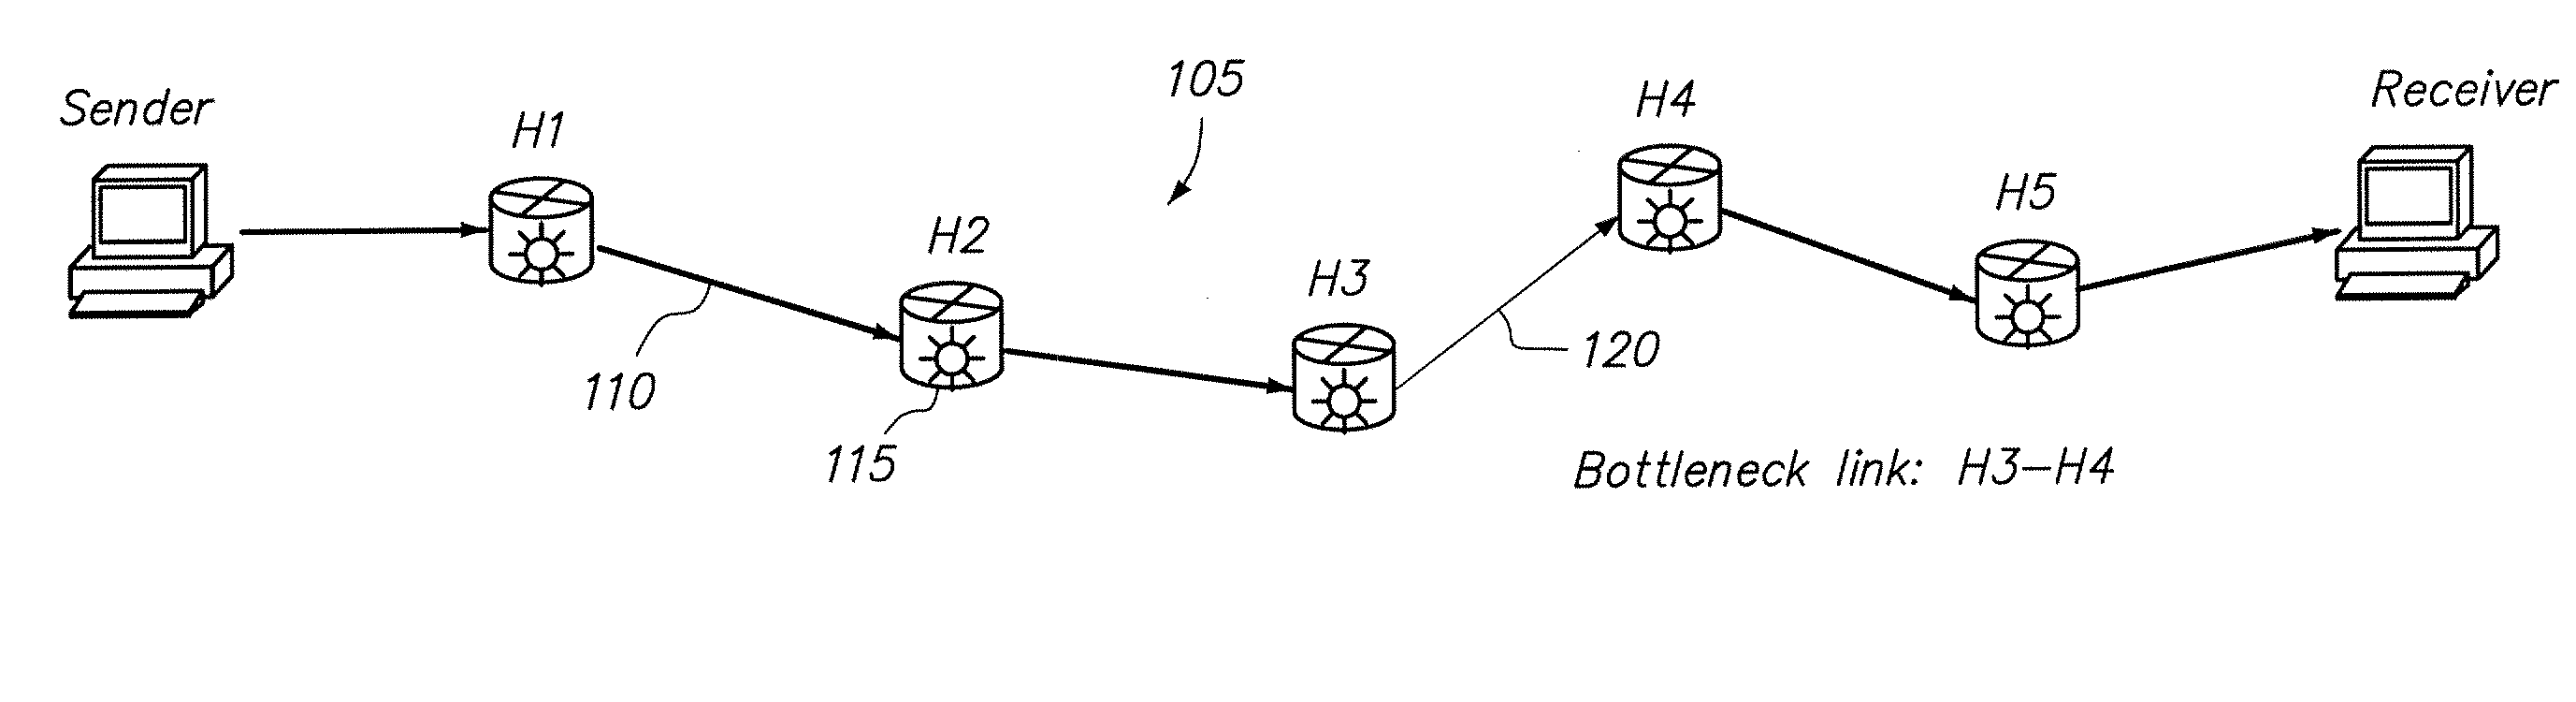 Systems and methods for  computing data transmission characteristics of a network path based on single-ended measurements